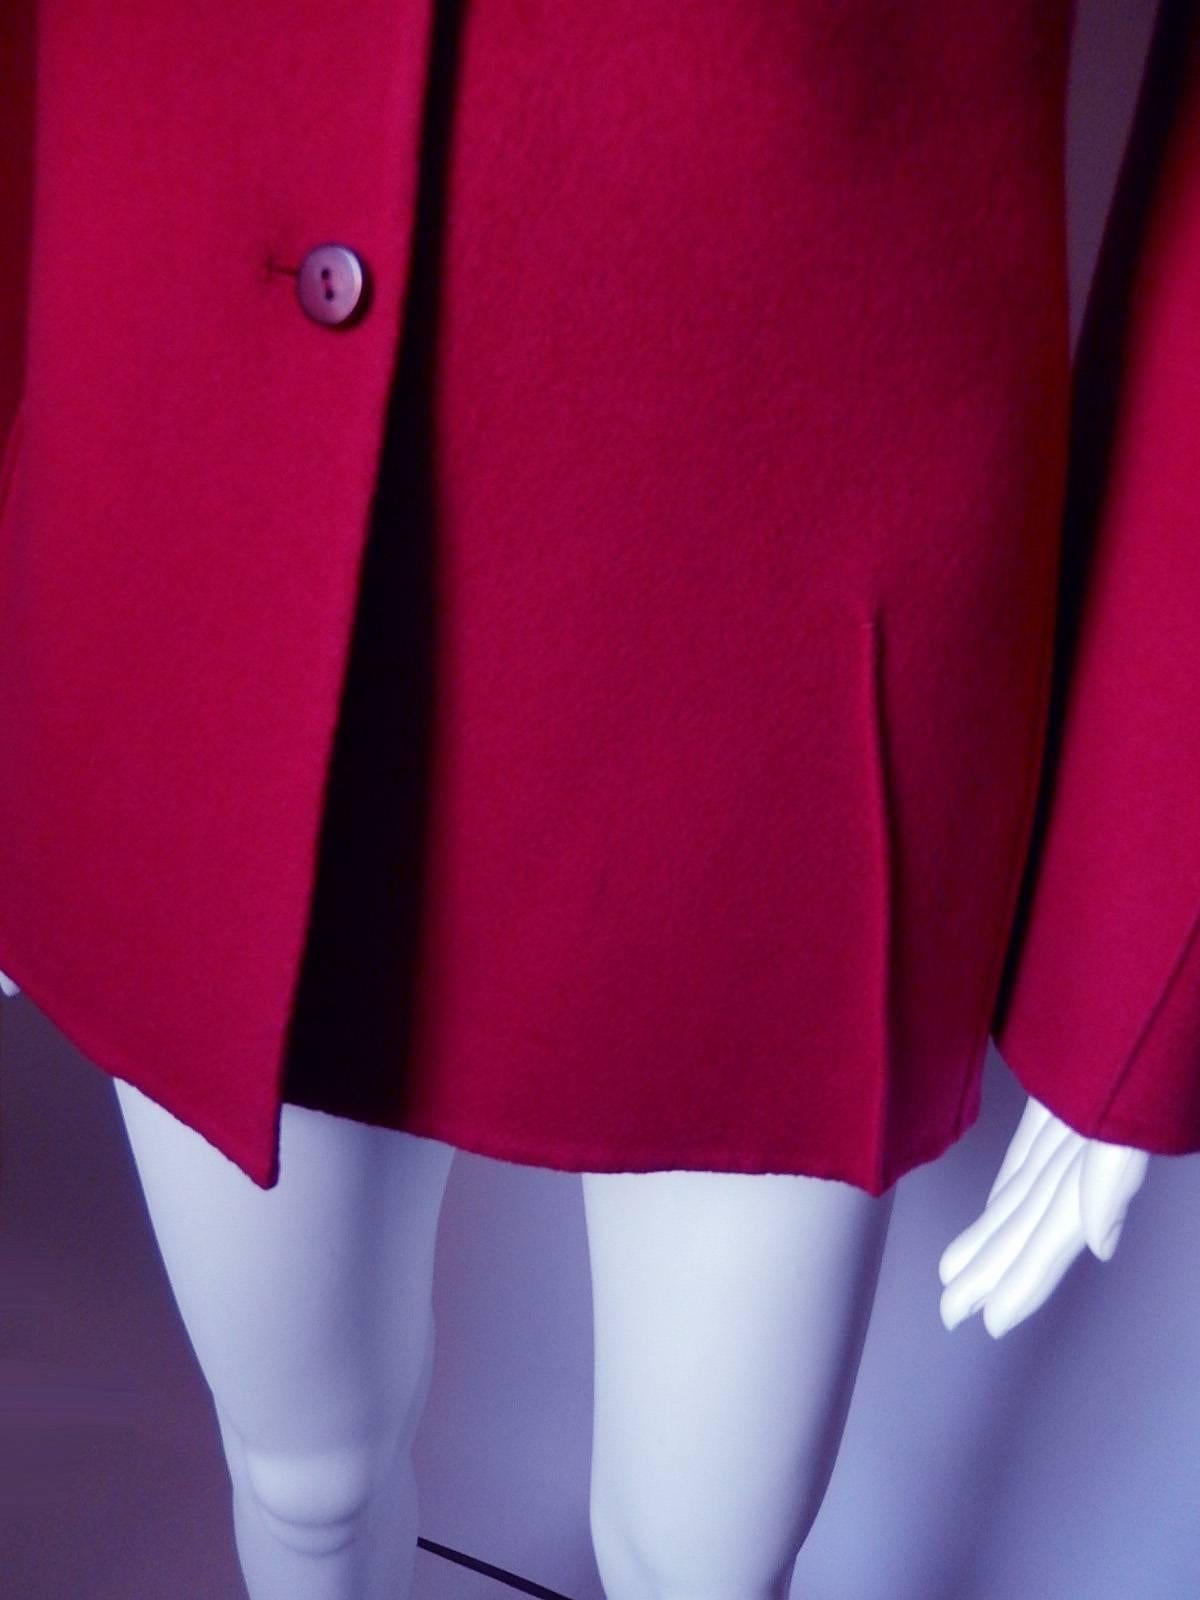 Chado Ralph Rucci 100% Cashmere Red/Raspberry Jacket Size 6 In Excellent Condition For Sale In New York, NY